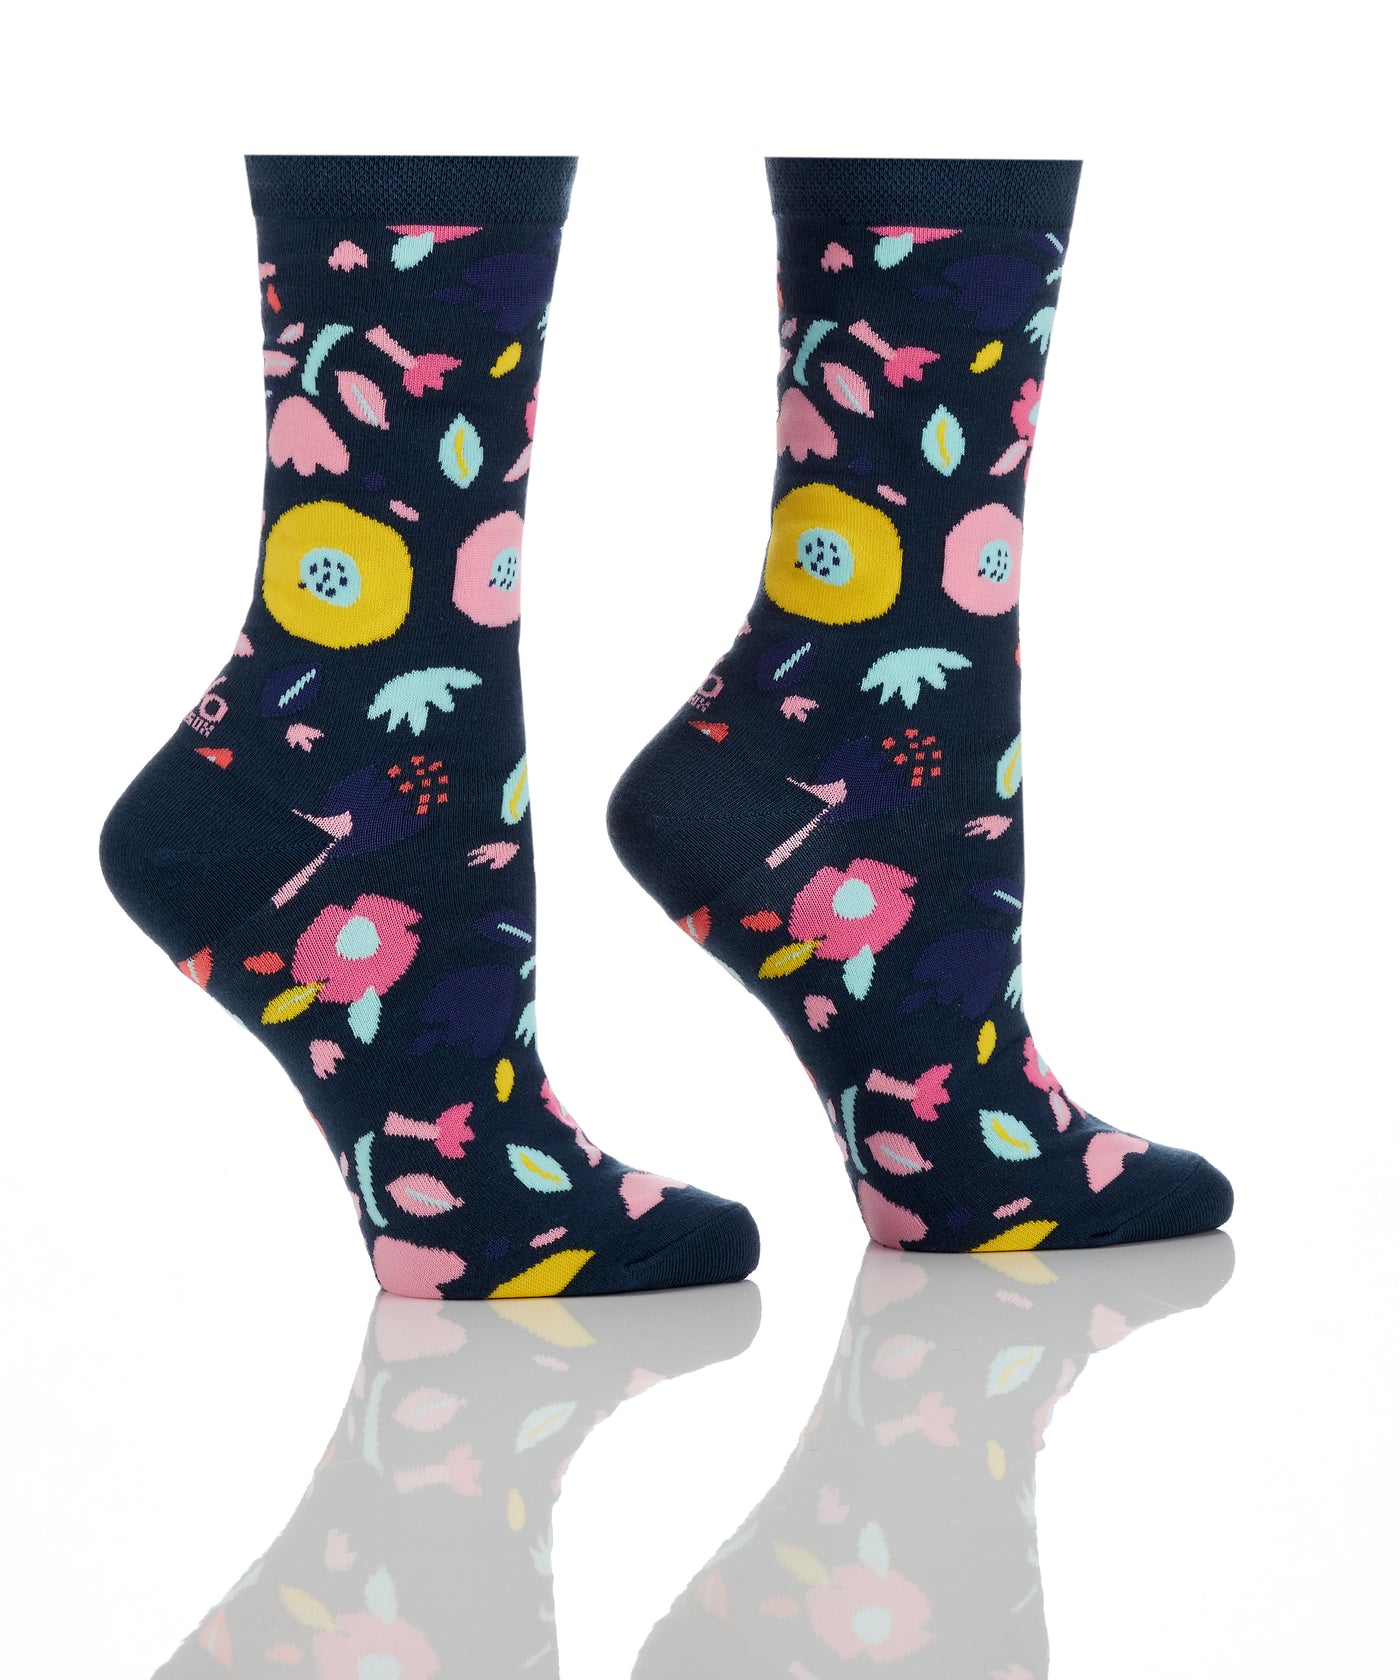 Women’s Crew Socks-Abstract Floral Blue